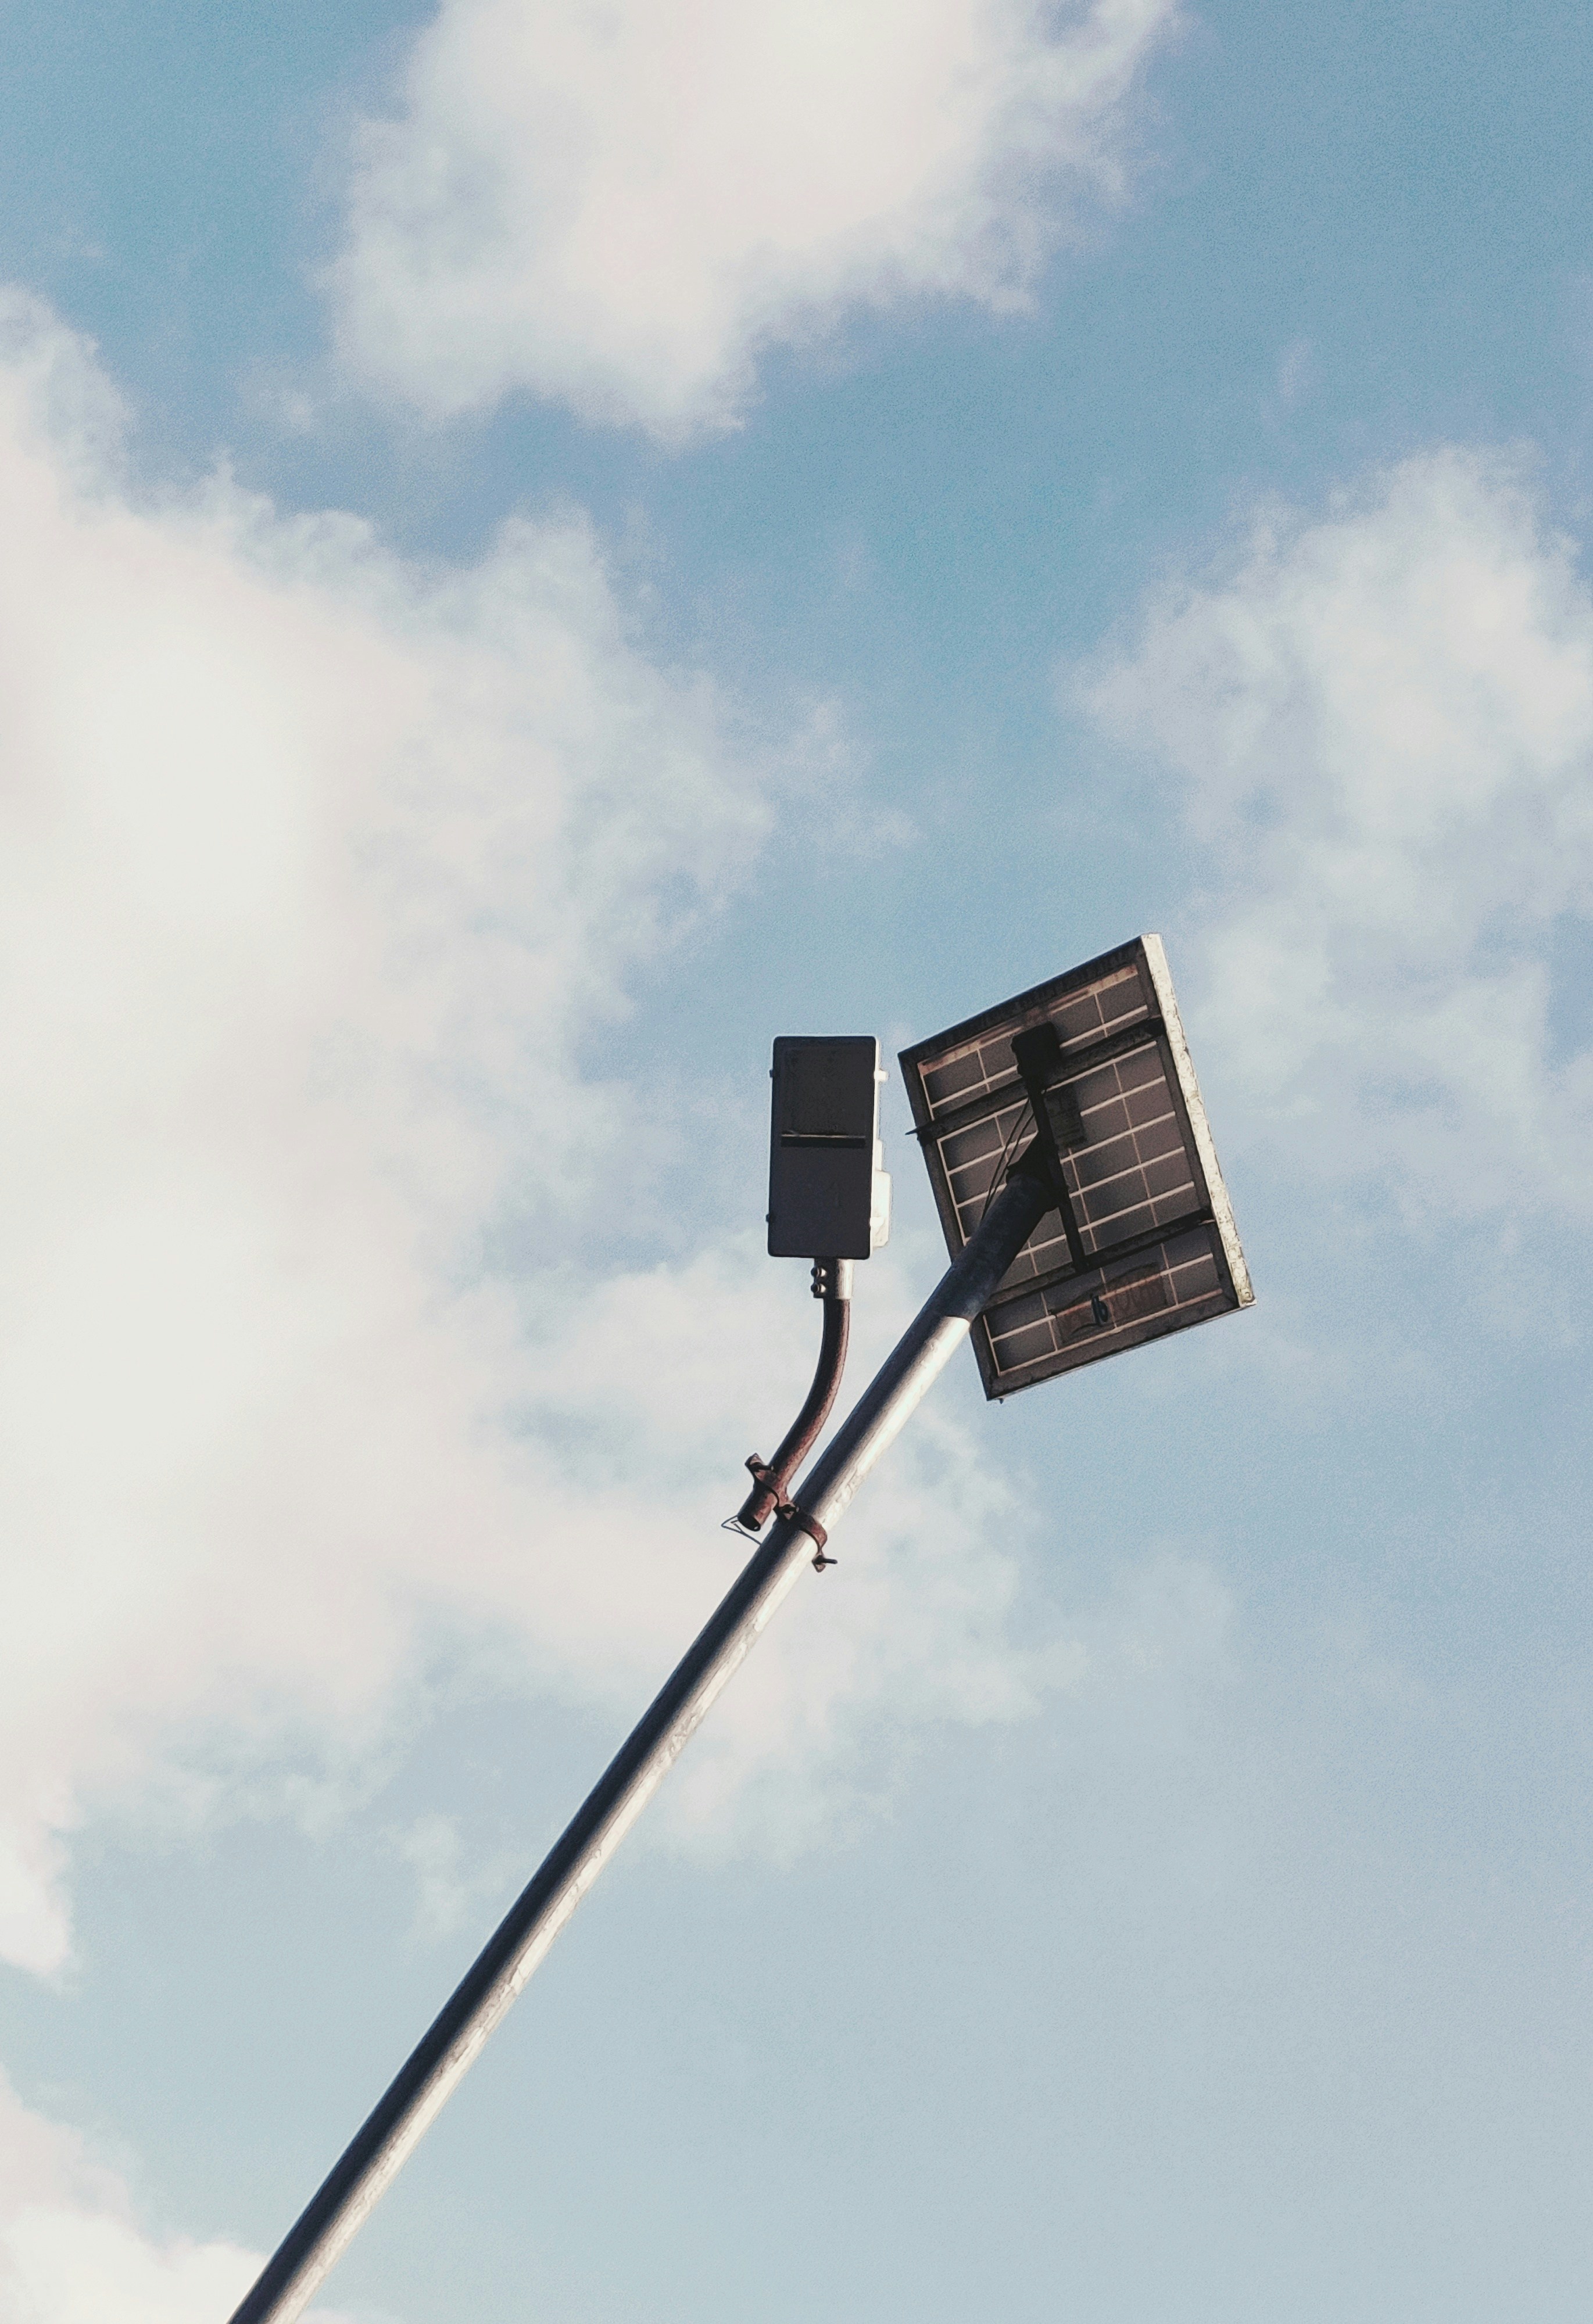 Modern LED street light design with sustainable energy features